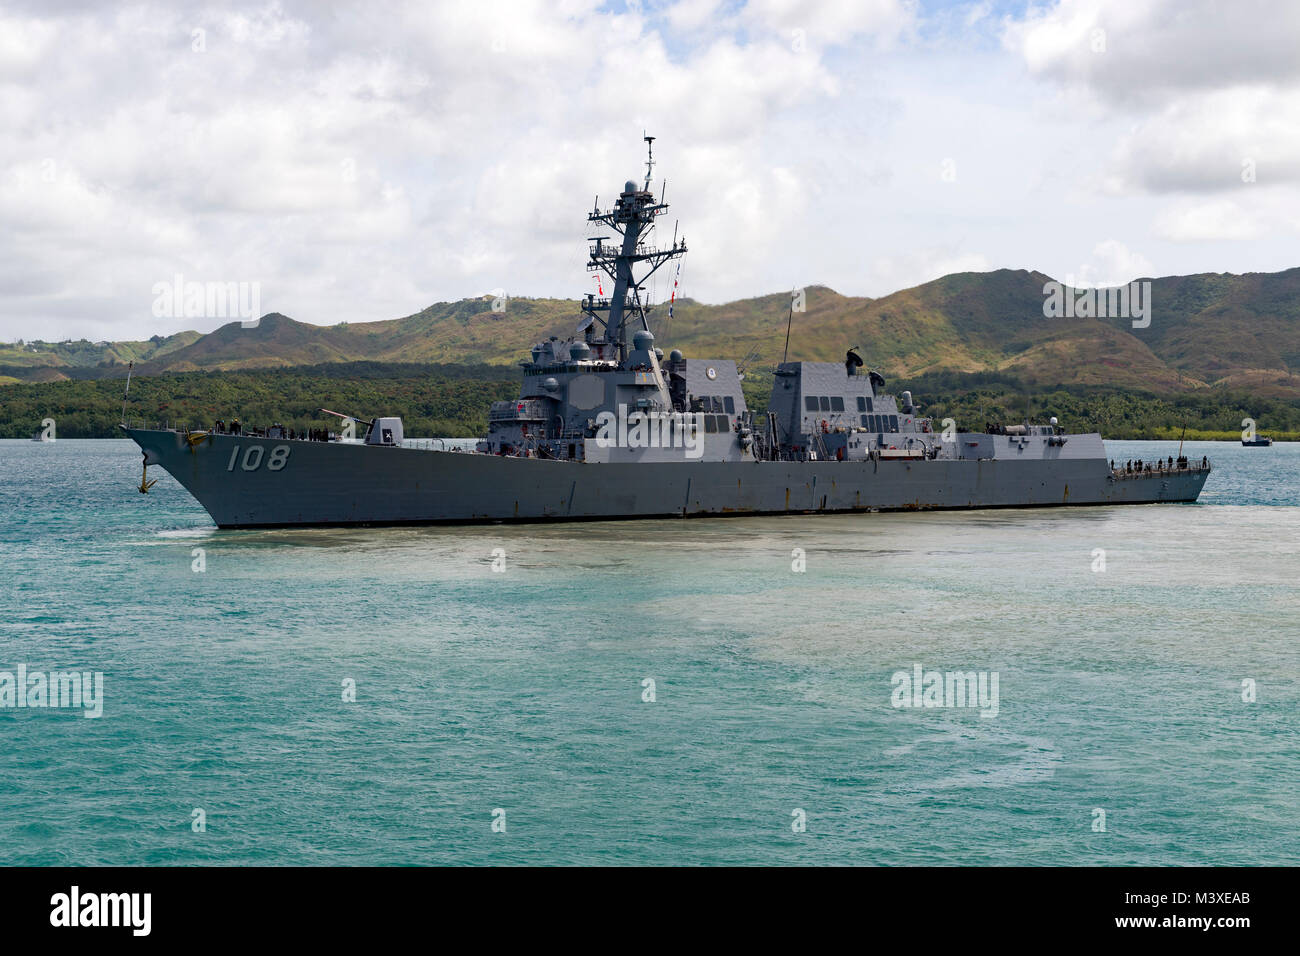 180203-N-LN093-0007  SANTA RITA, Guam (Feb. 3, 2018) The Arleigh Burke-Class guided-missile destroyer USS Wayne E Meyer (DDG 108) departs Apra Harbor, Naval Base Guam after a planned port visit. Wayne E Meyer is currently operating in the Pacific as part of the Carl Vinson Strike Group. (U.S. Navy photo by Mass Communication Specialist 3rd Class Jasen Morenogarcia/Released) Stock Photo